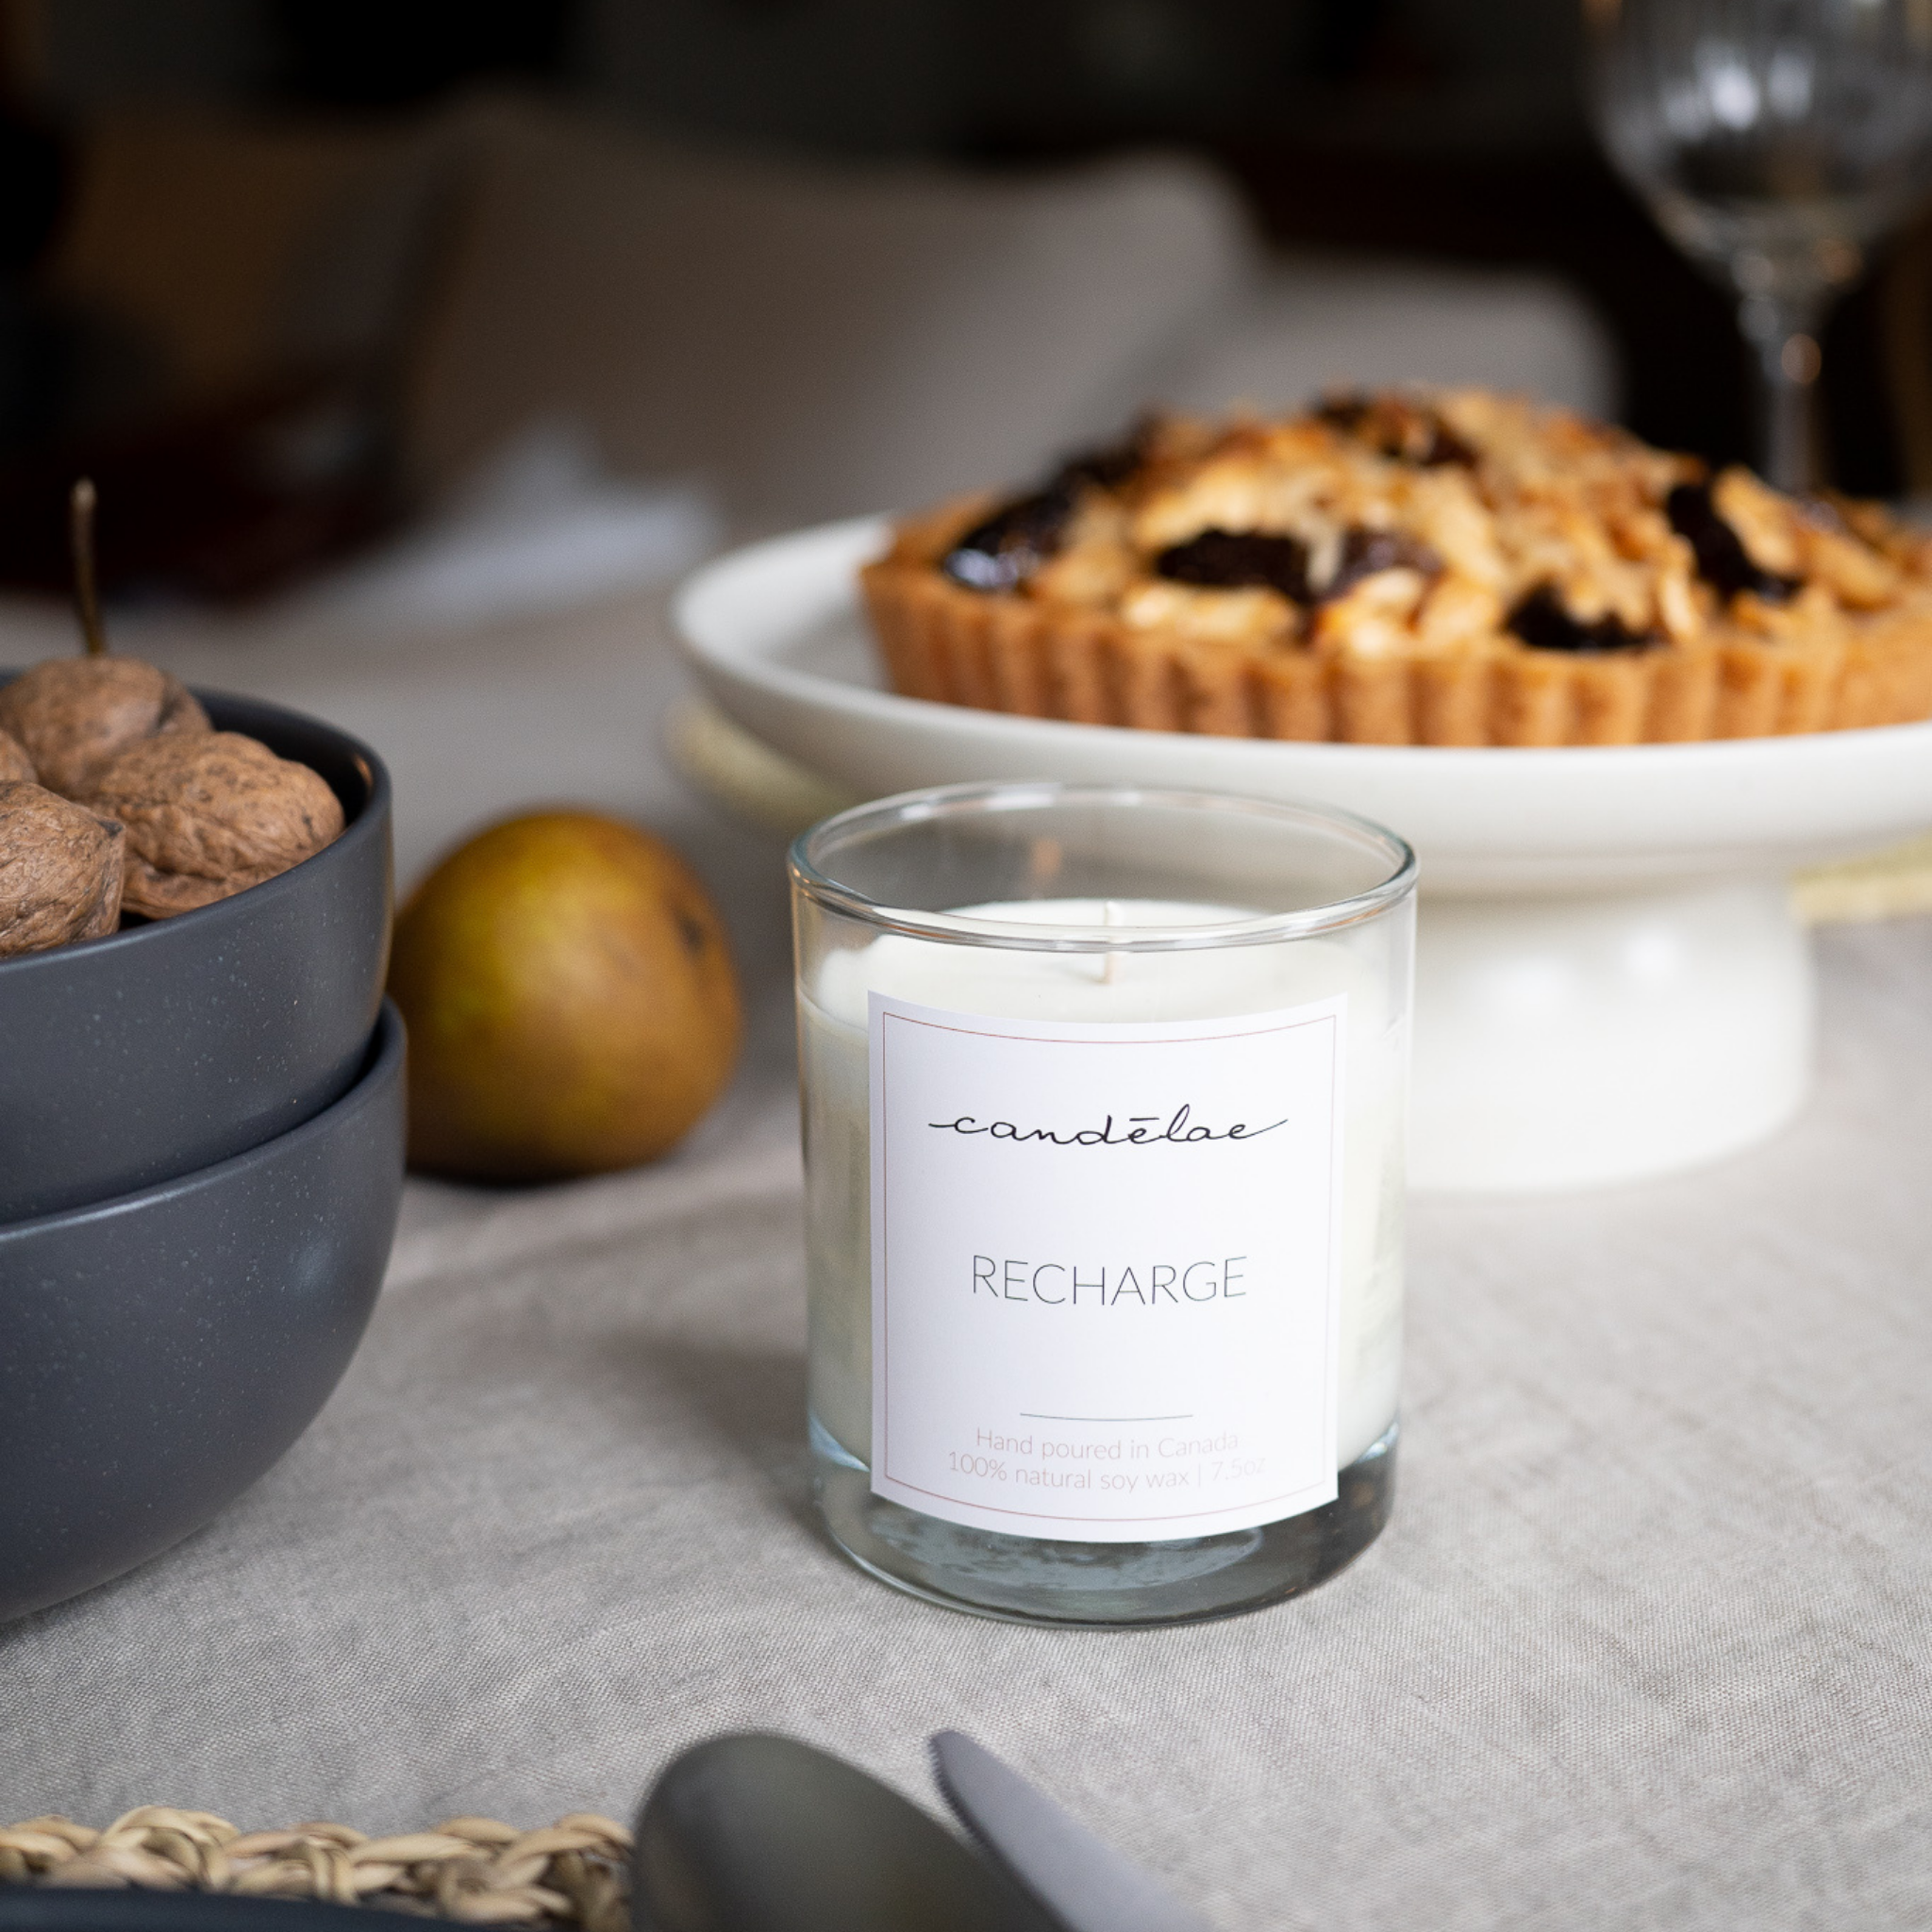 Recharge soy wax candle by candēlae is displayed for a dinner in Toronto, Ontario, Canada